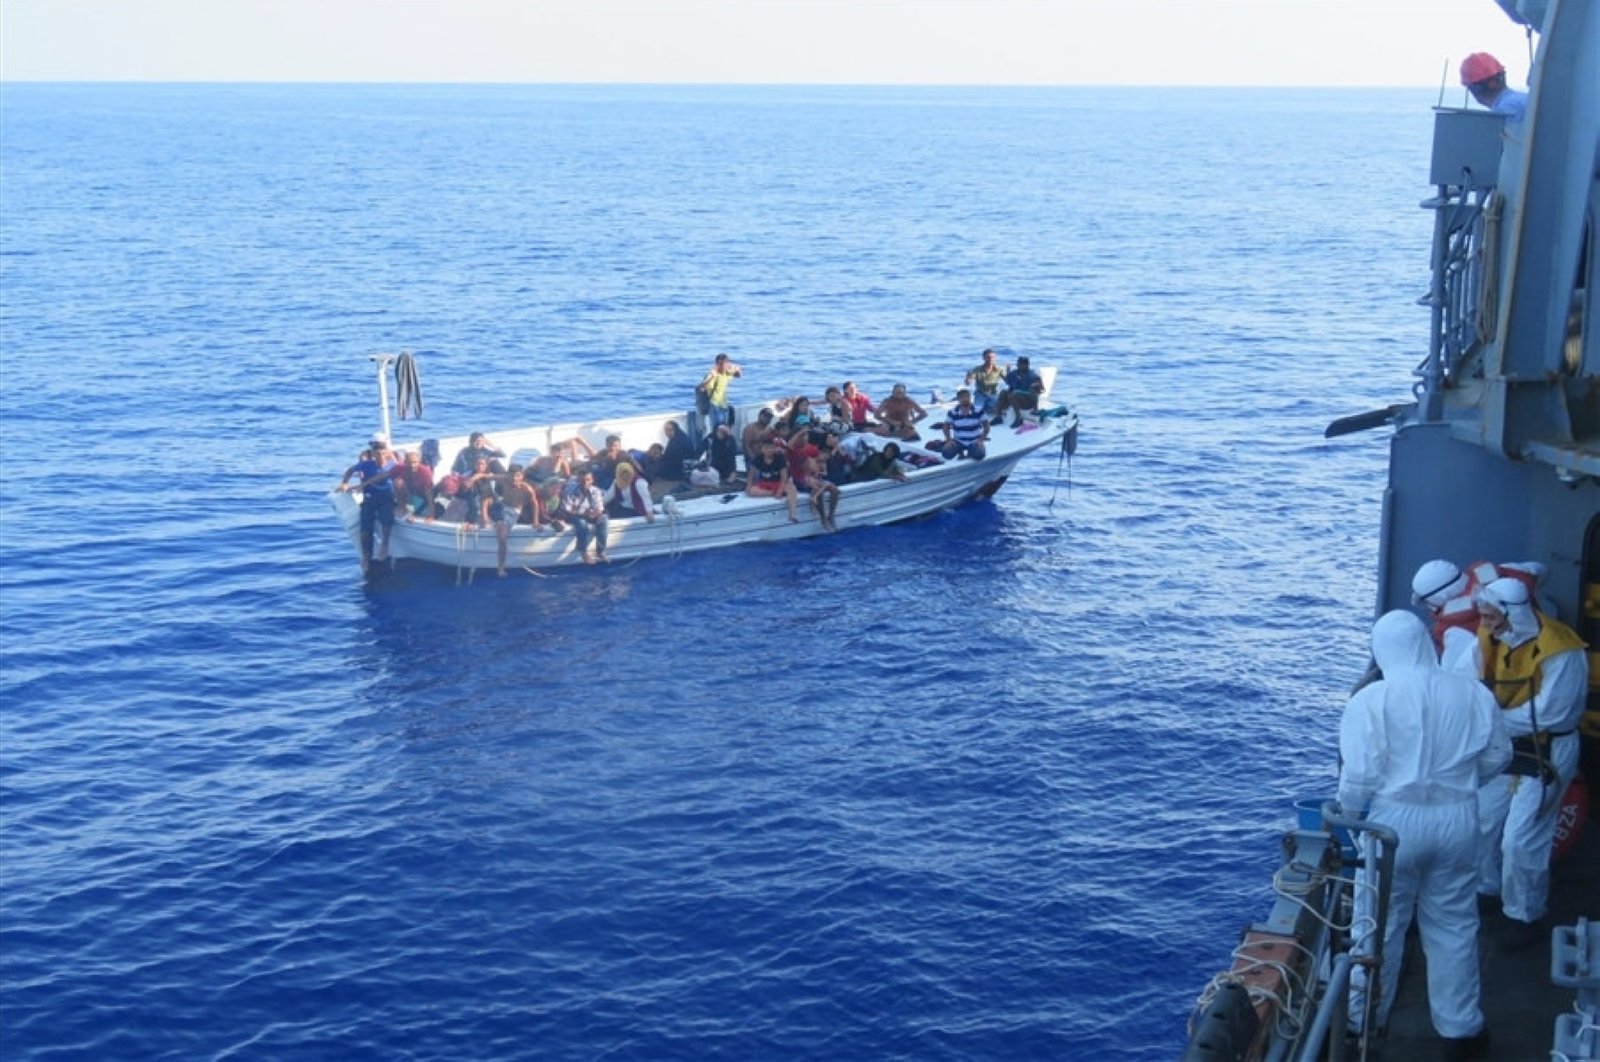 Thirty-six irregular migrants were rescued by the personnel of TCG Bozcaada corvette, which is on a mission as part of the United Nations Interim Force in Lebanon (UNIFIL), in the Mediterranean Sea, Sept. 15, 2020. (AA Photo)